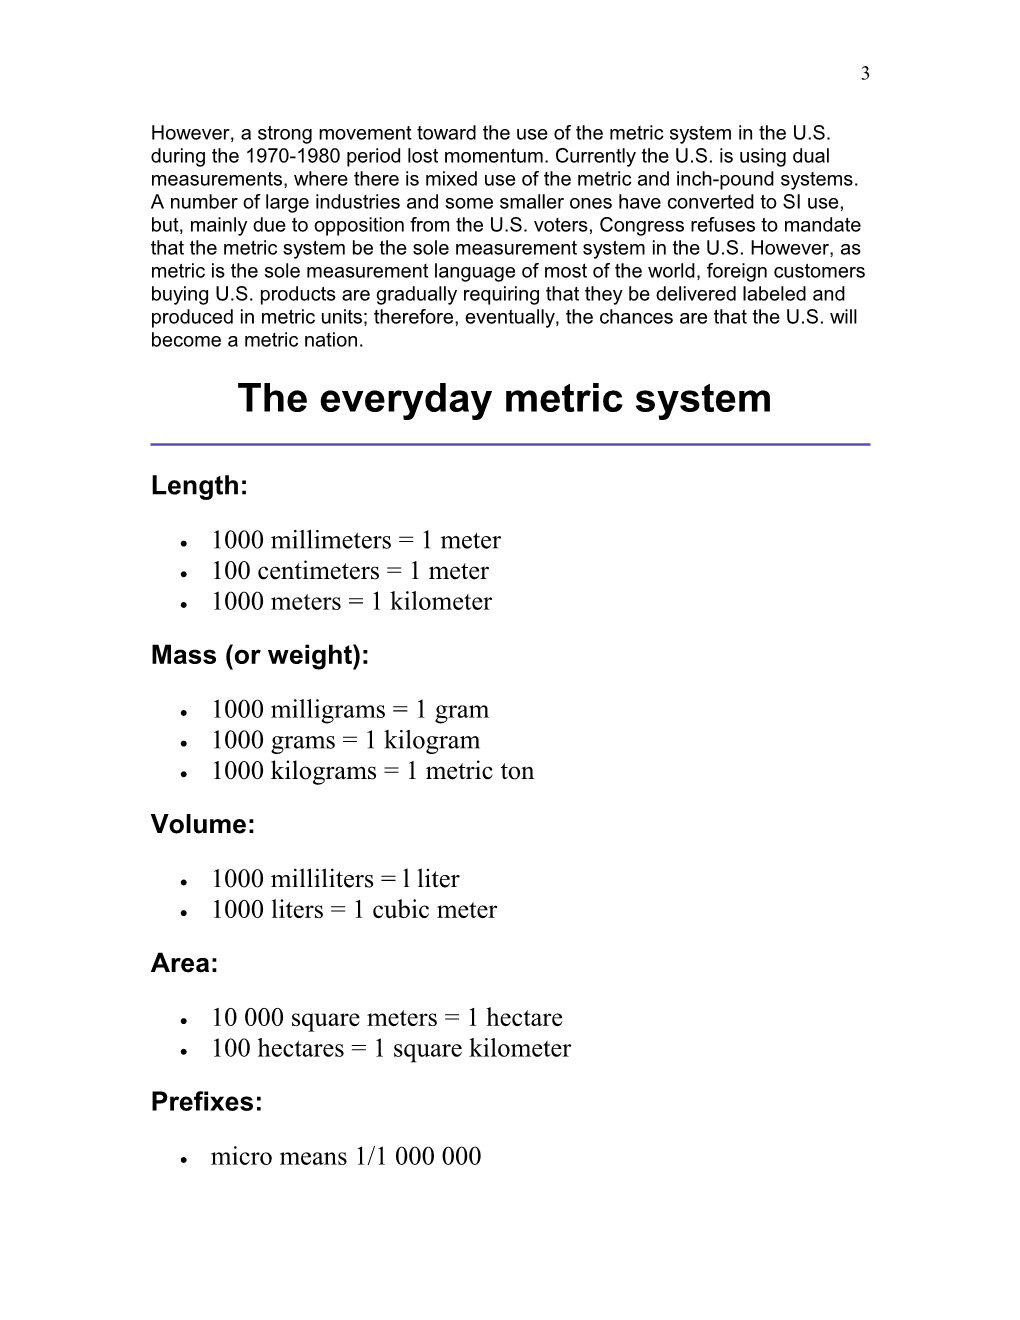 History of Metric System